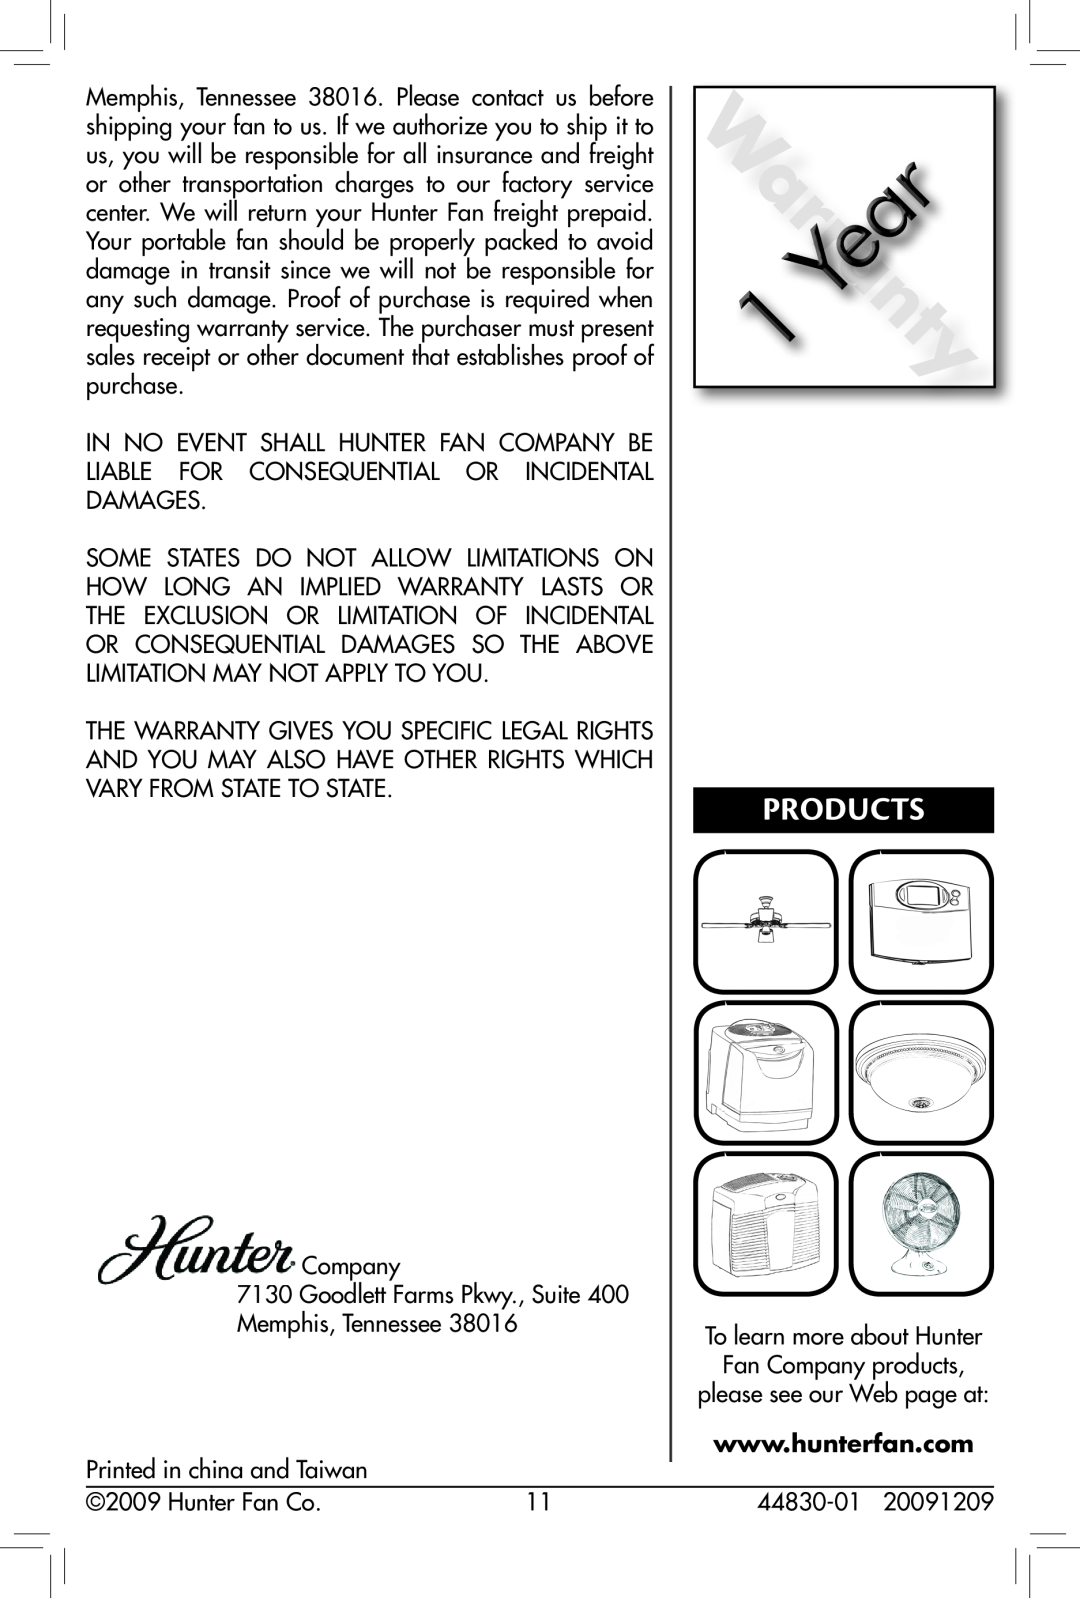 Hunter Fan 20091209, 44830-01, 90391 owner manual Products 